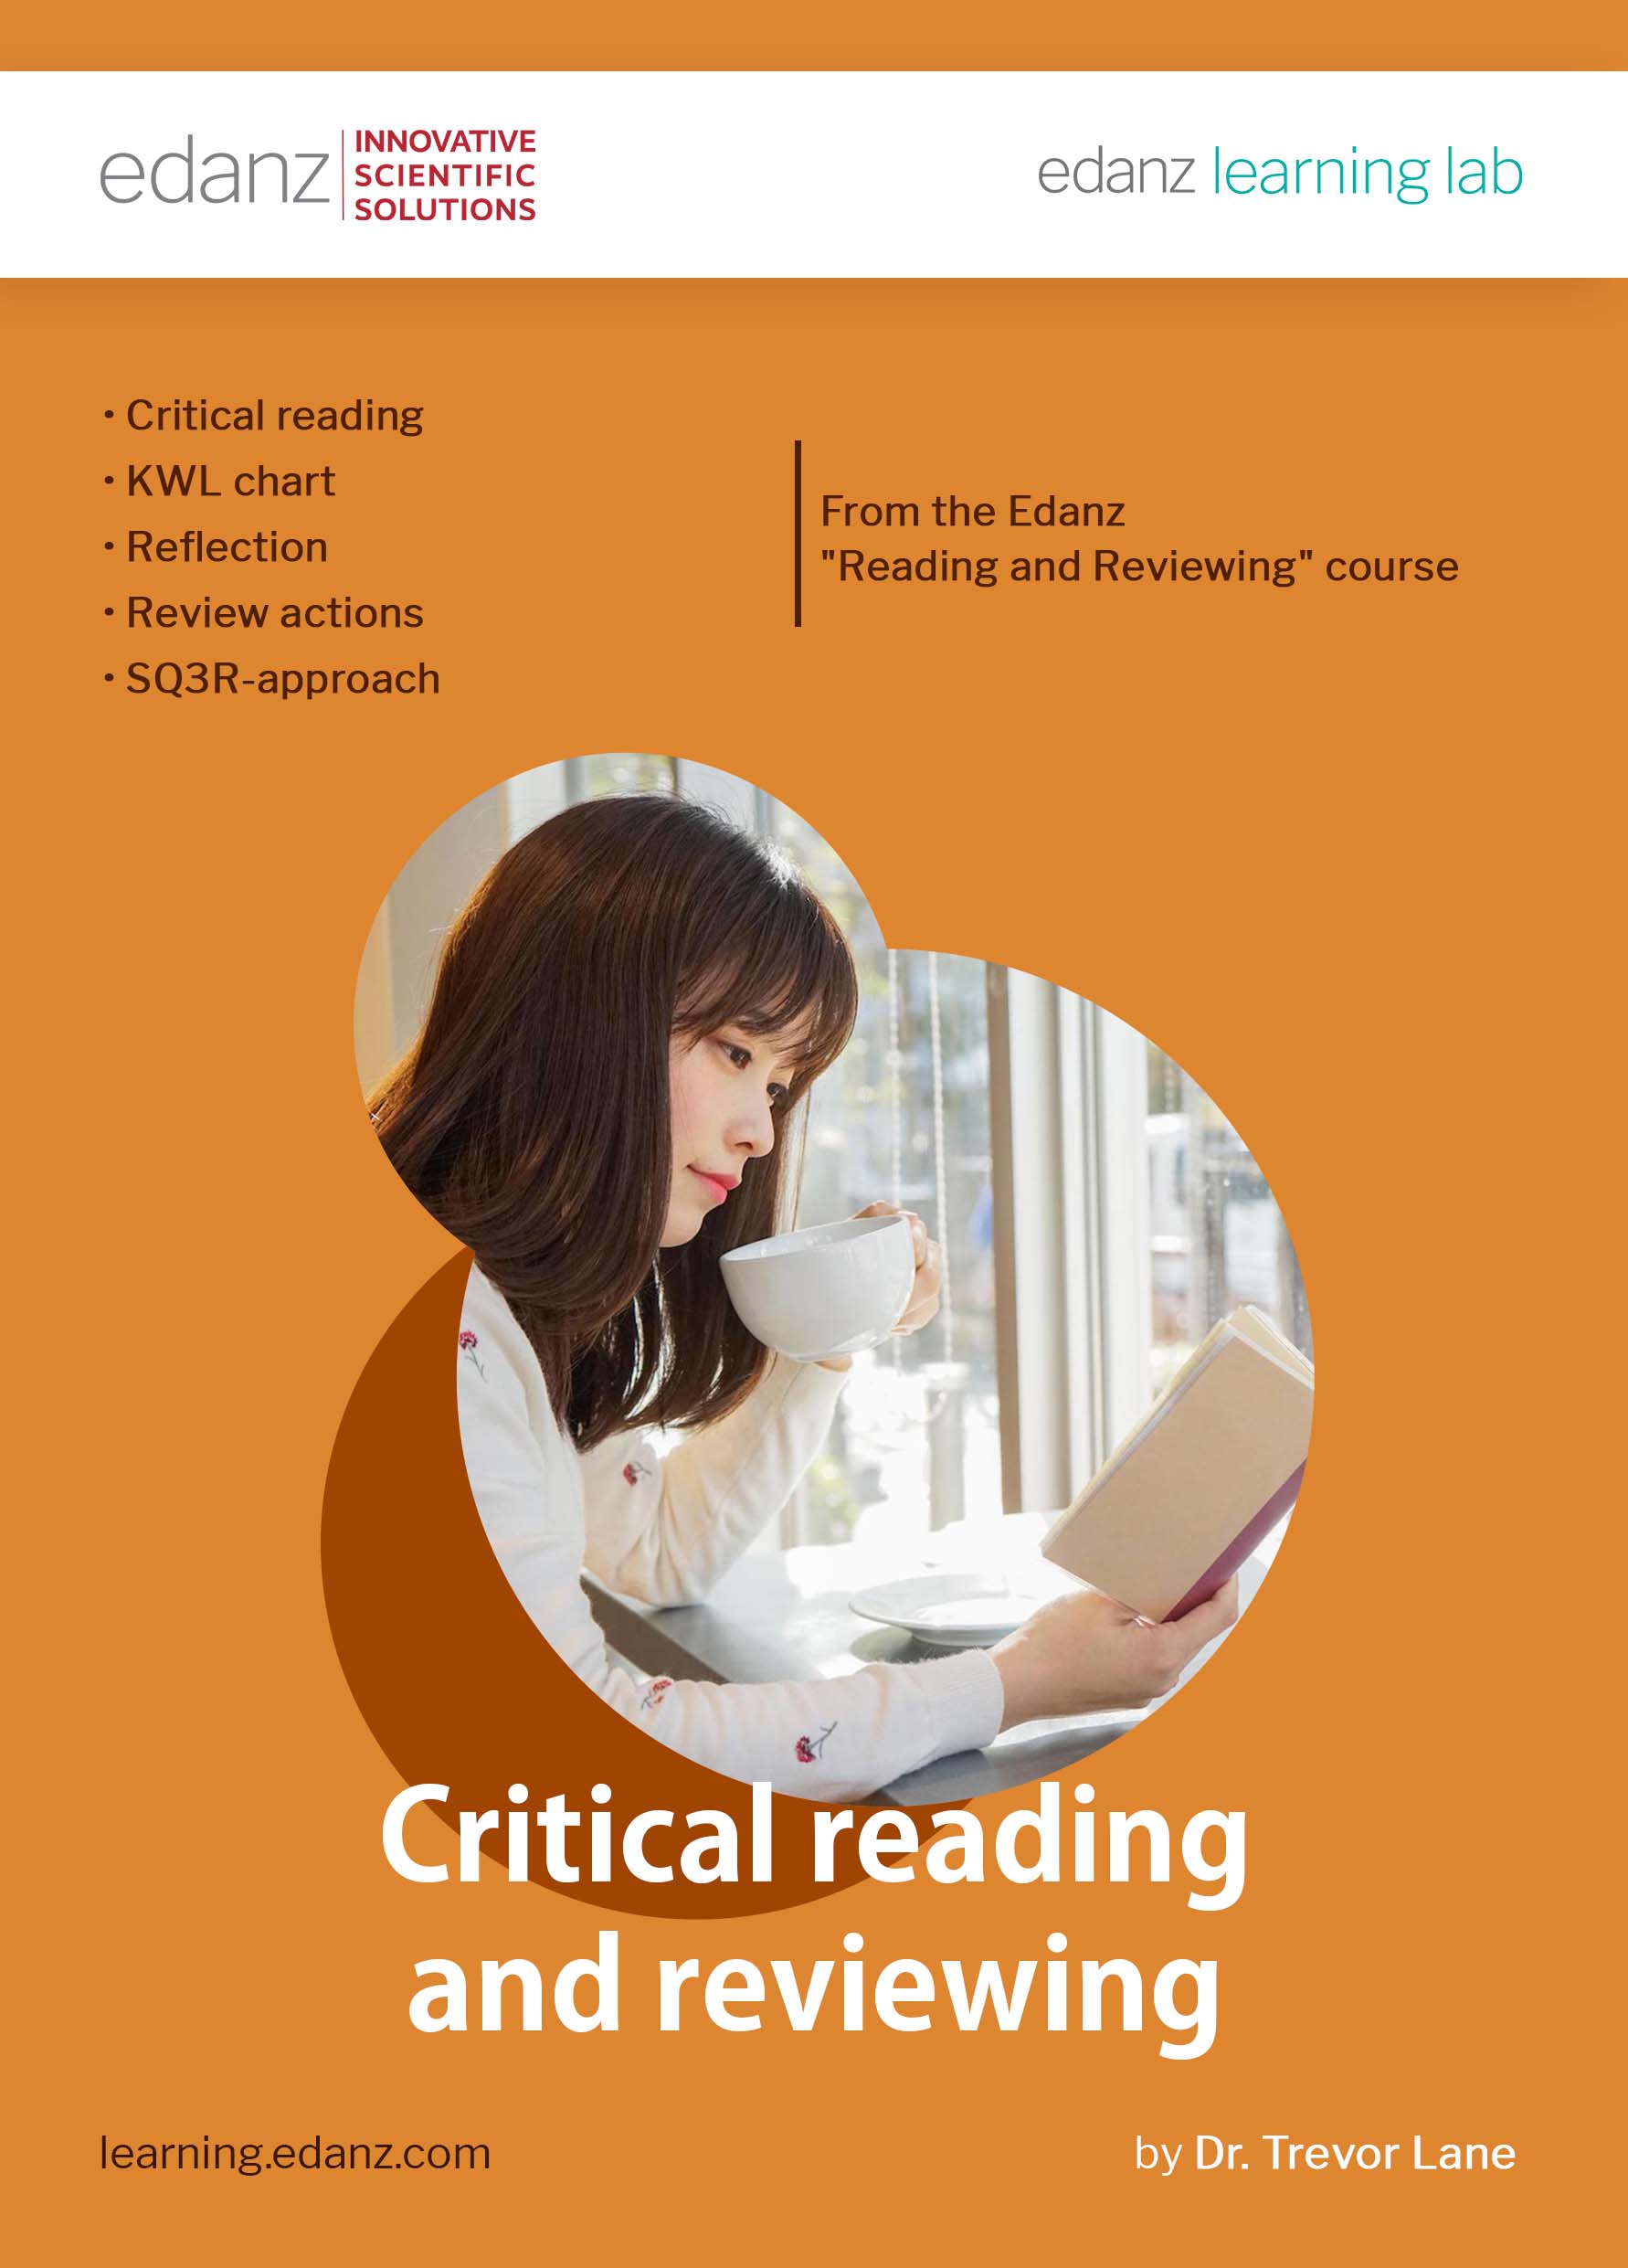 Critical reading and reviewing